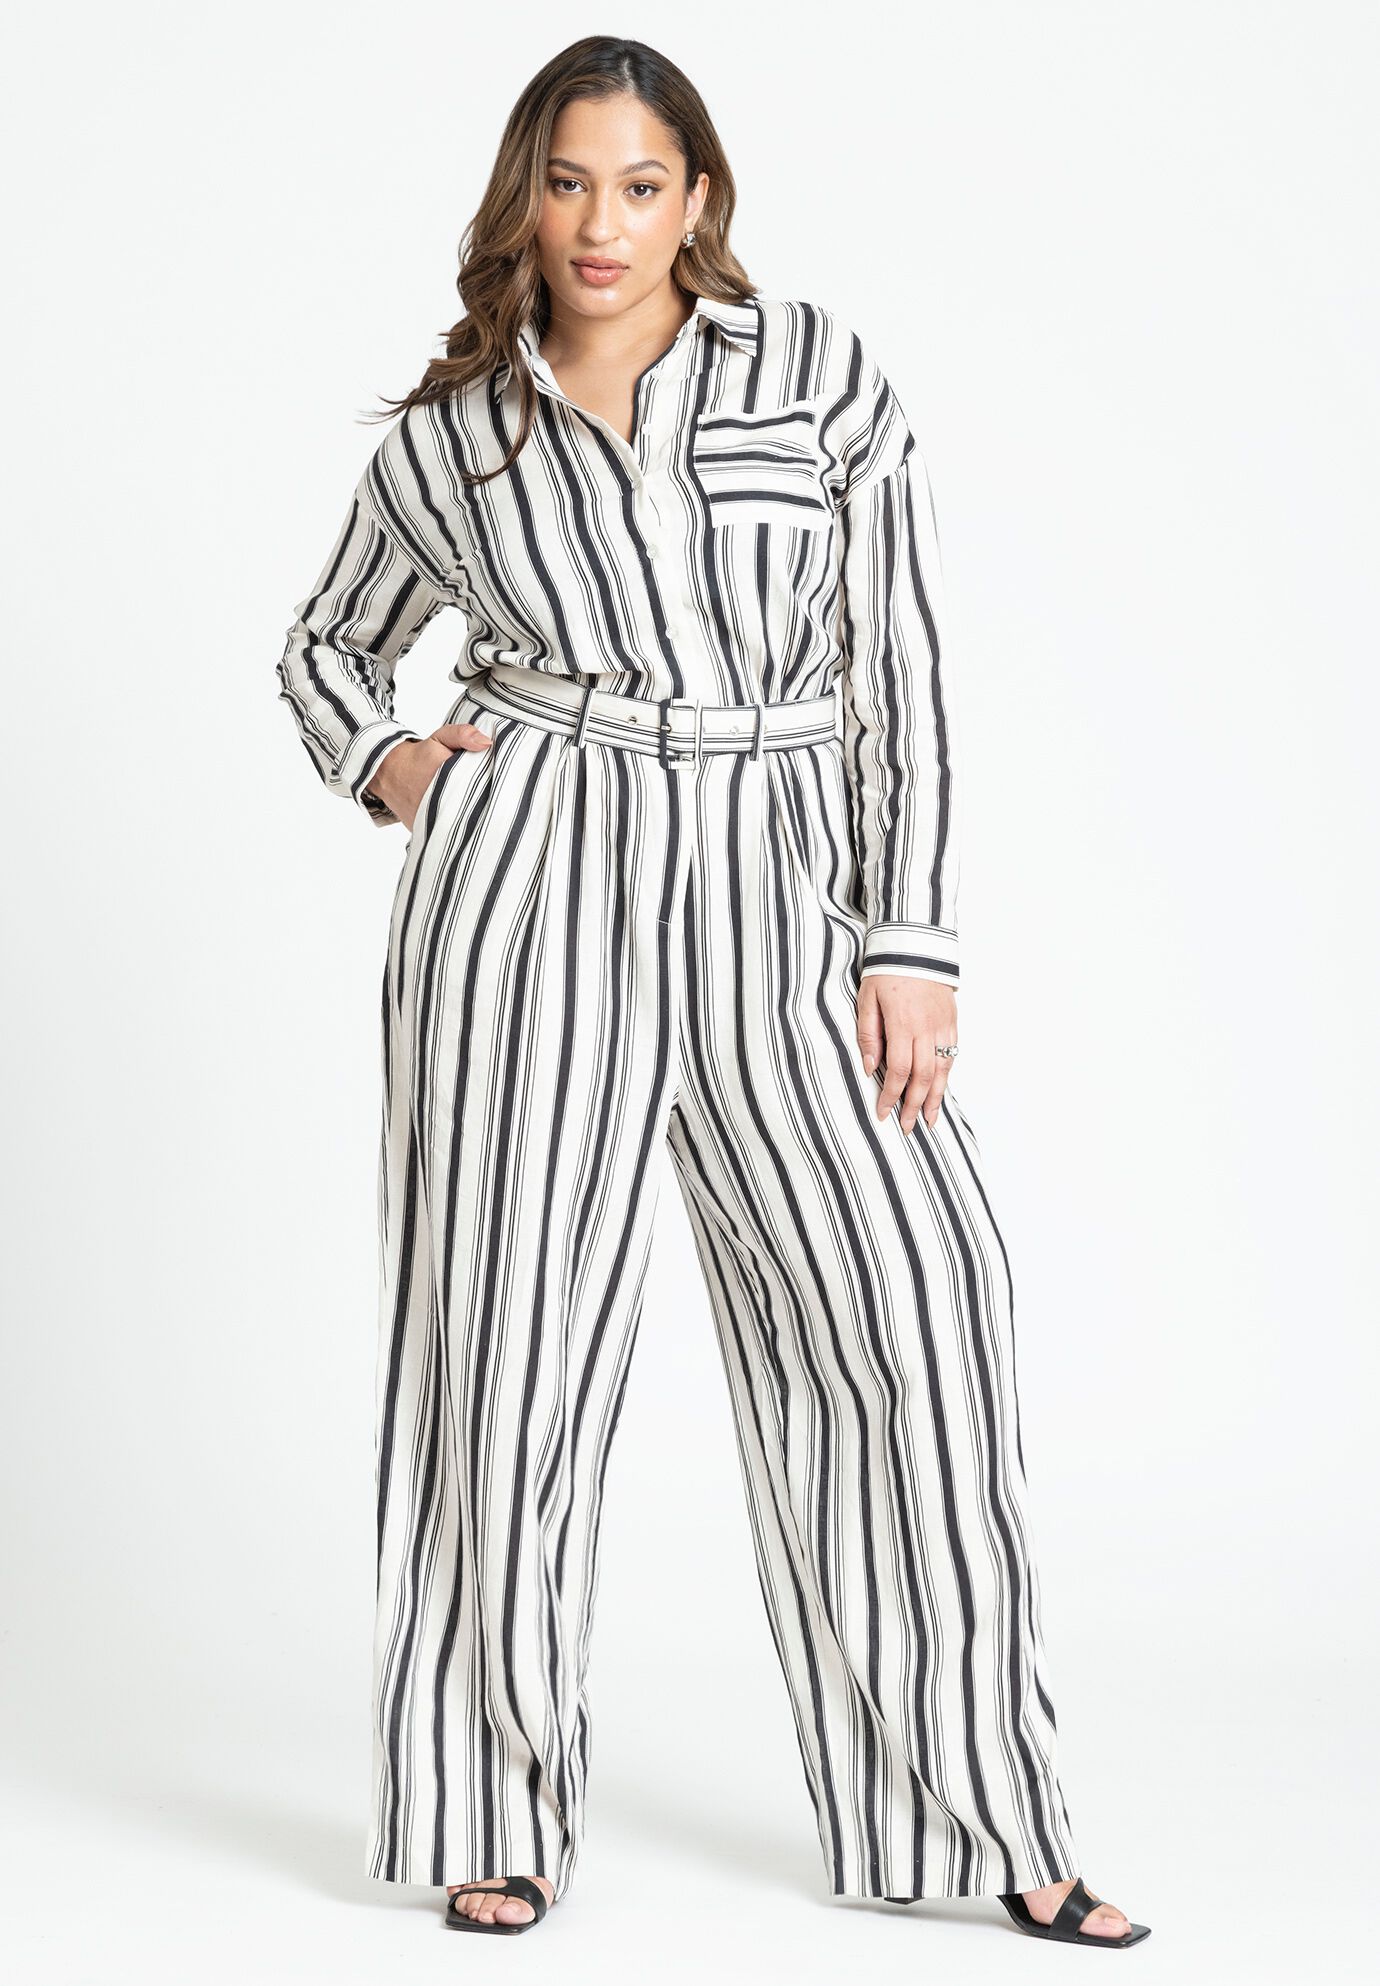 Plus Size Long Sleeves Dropped Shoulder Collared Striped Print Pocketed Pleated Belted Floor Length Jumpsuit